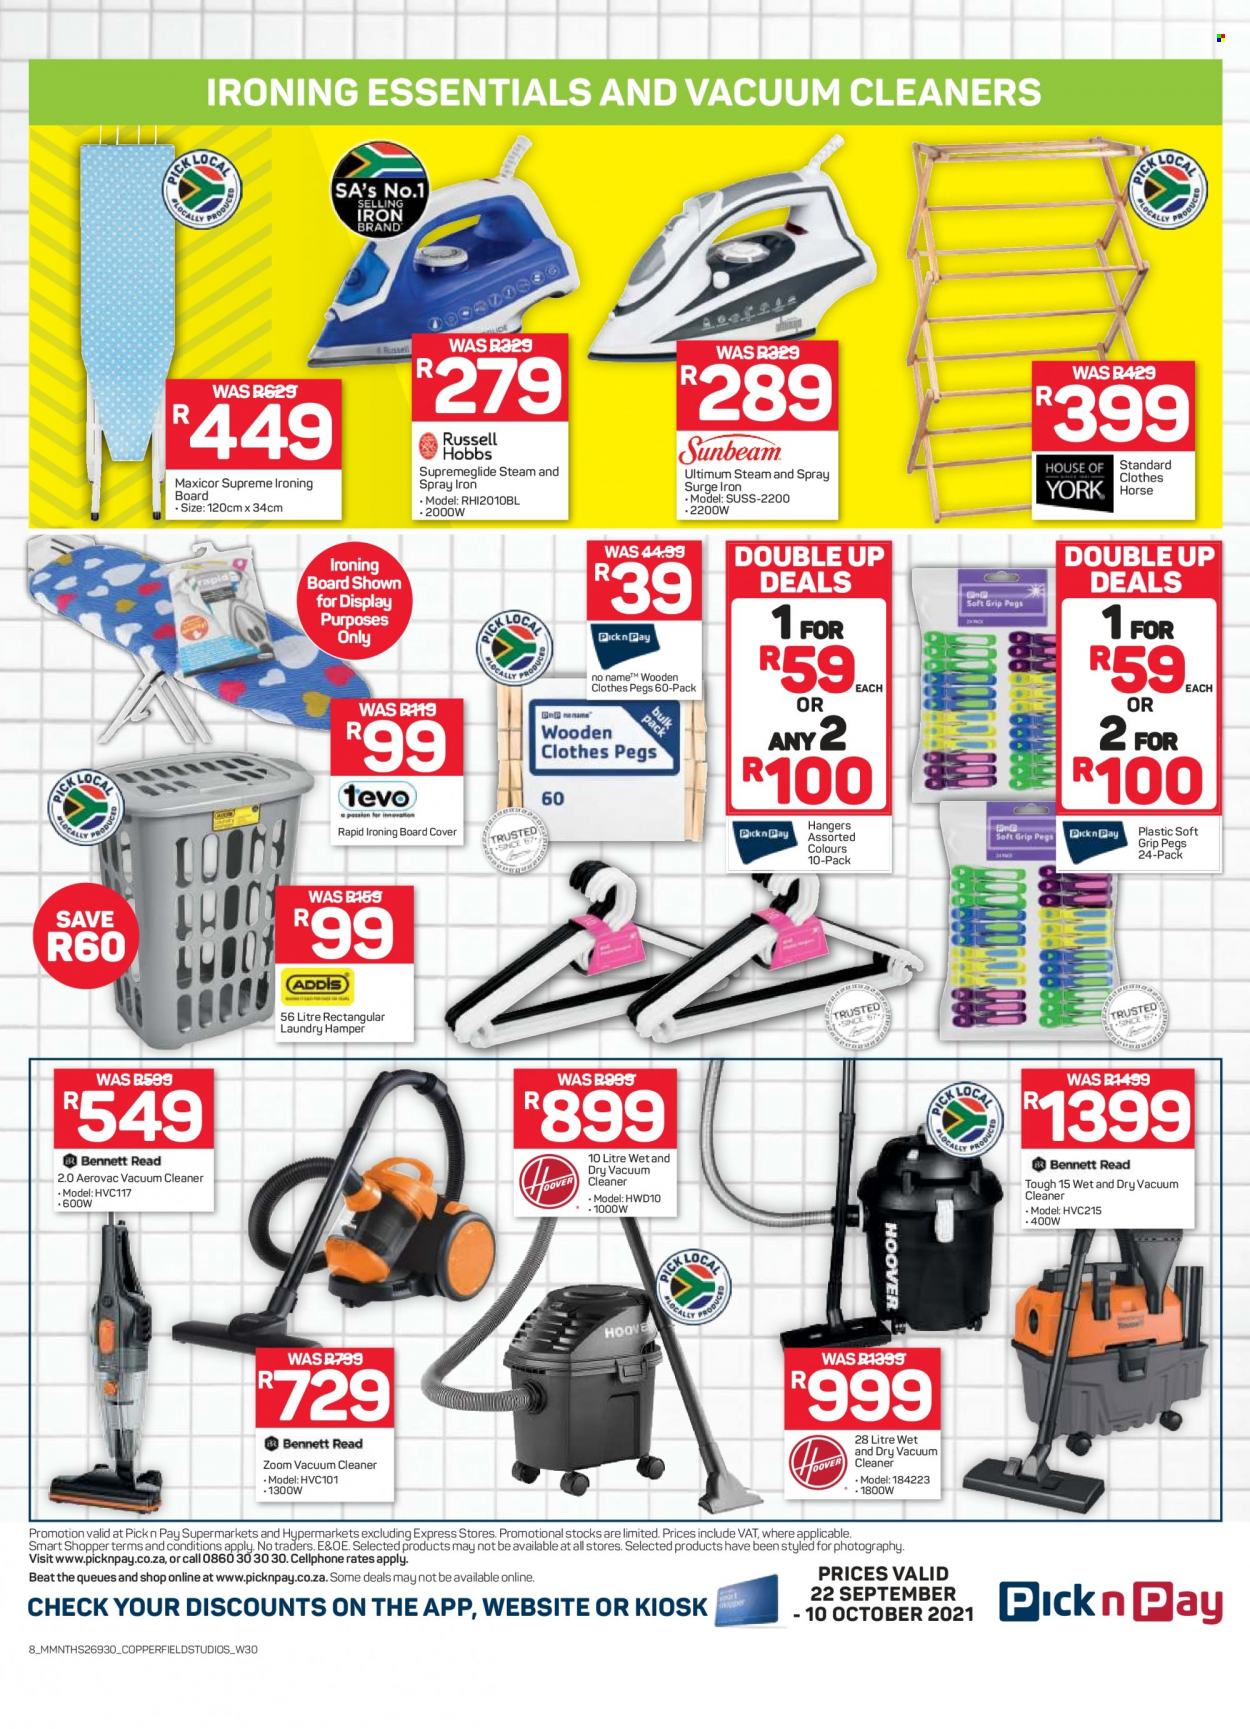 Pick n Pay specials - 09.22.2021 - 10.10.2021. 